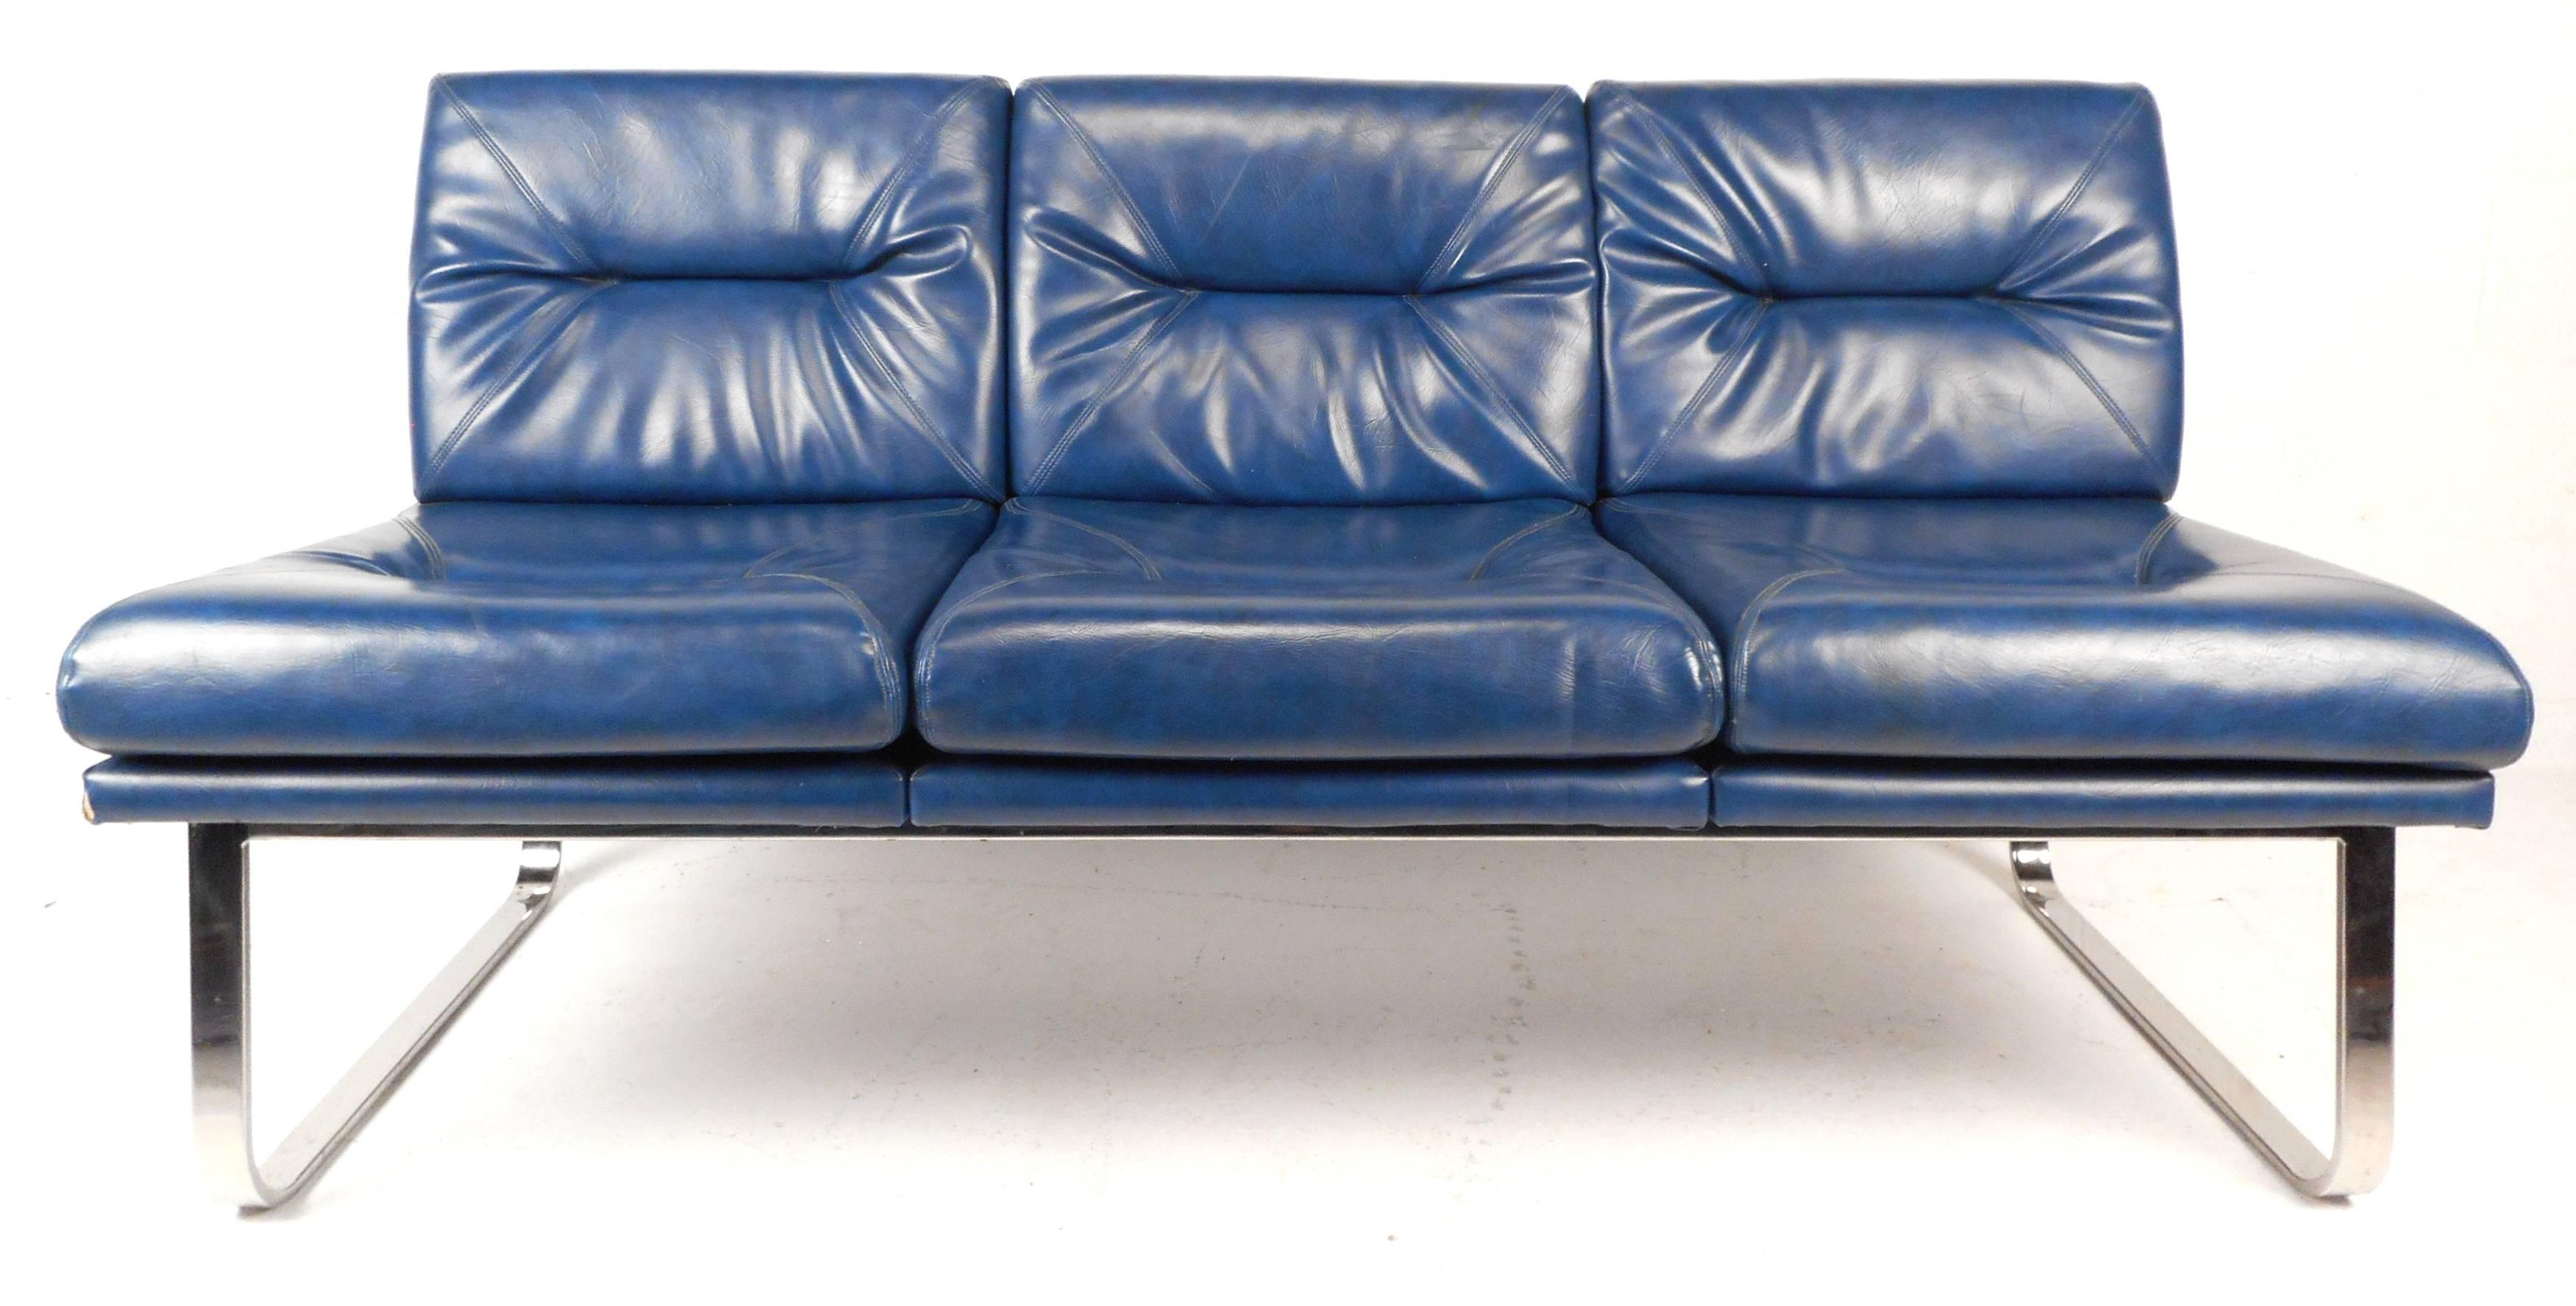 This stunning Mid-Century Modern sofa features unique chrome base and beautiful royal blue vinyl upholstery. The stylish design makes it perfect for any setting. Please confirm item location (NY or NJ).